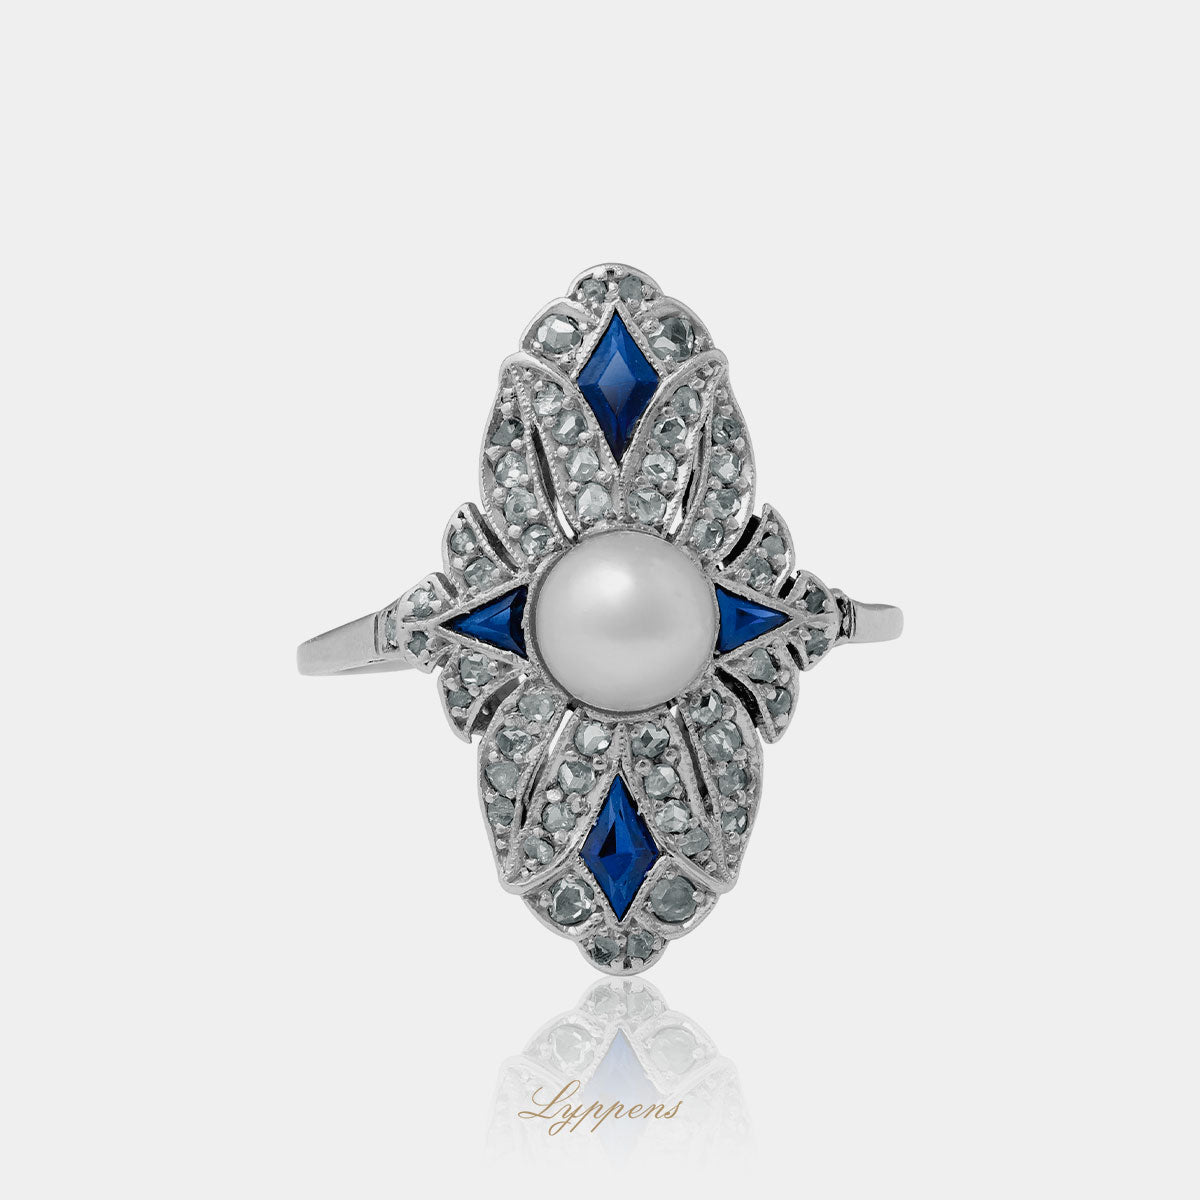 White gold and platinum Art Deco ring set with pearl, sapphire and diamonds